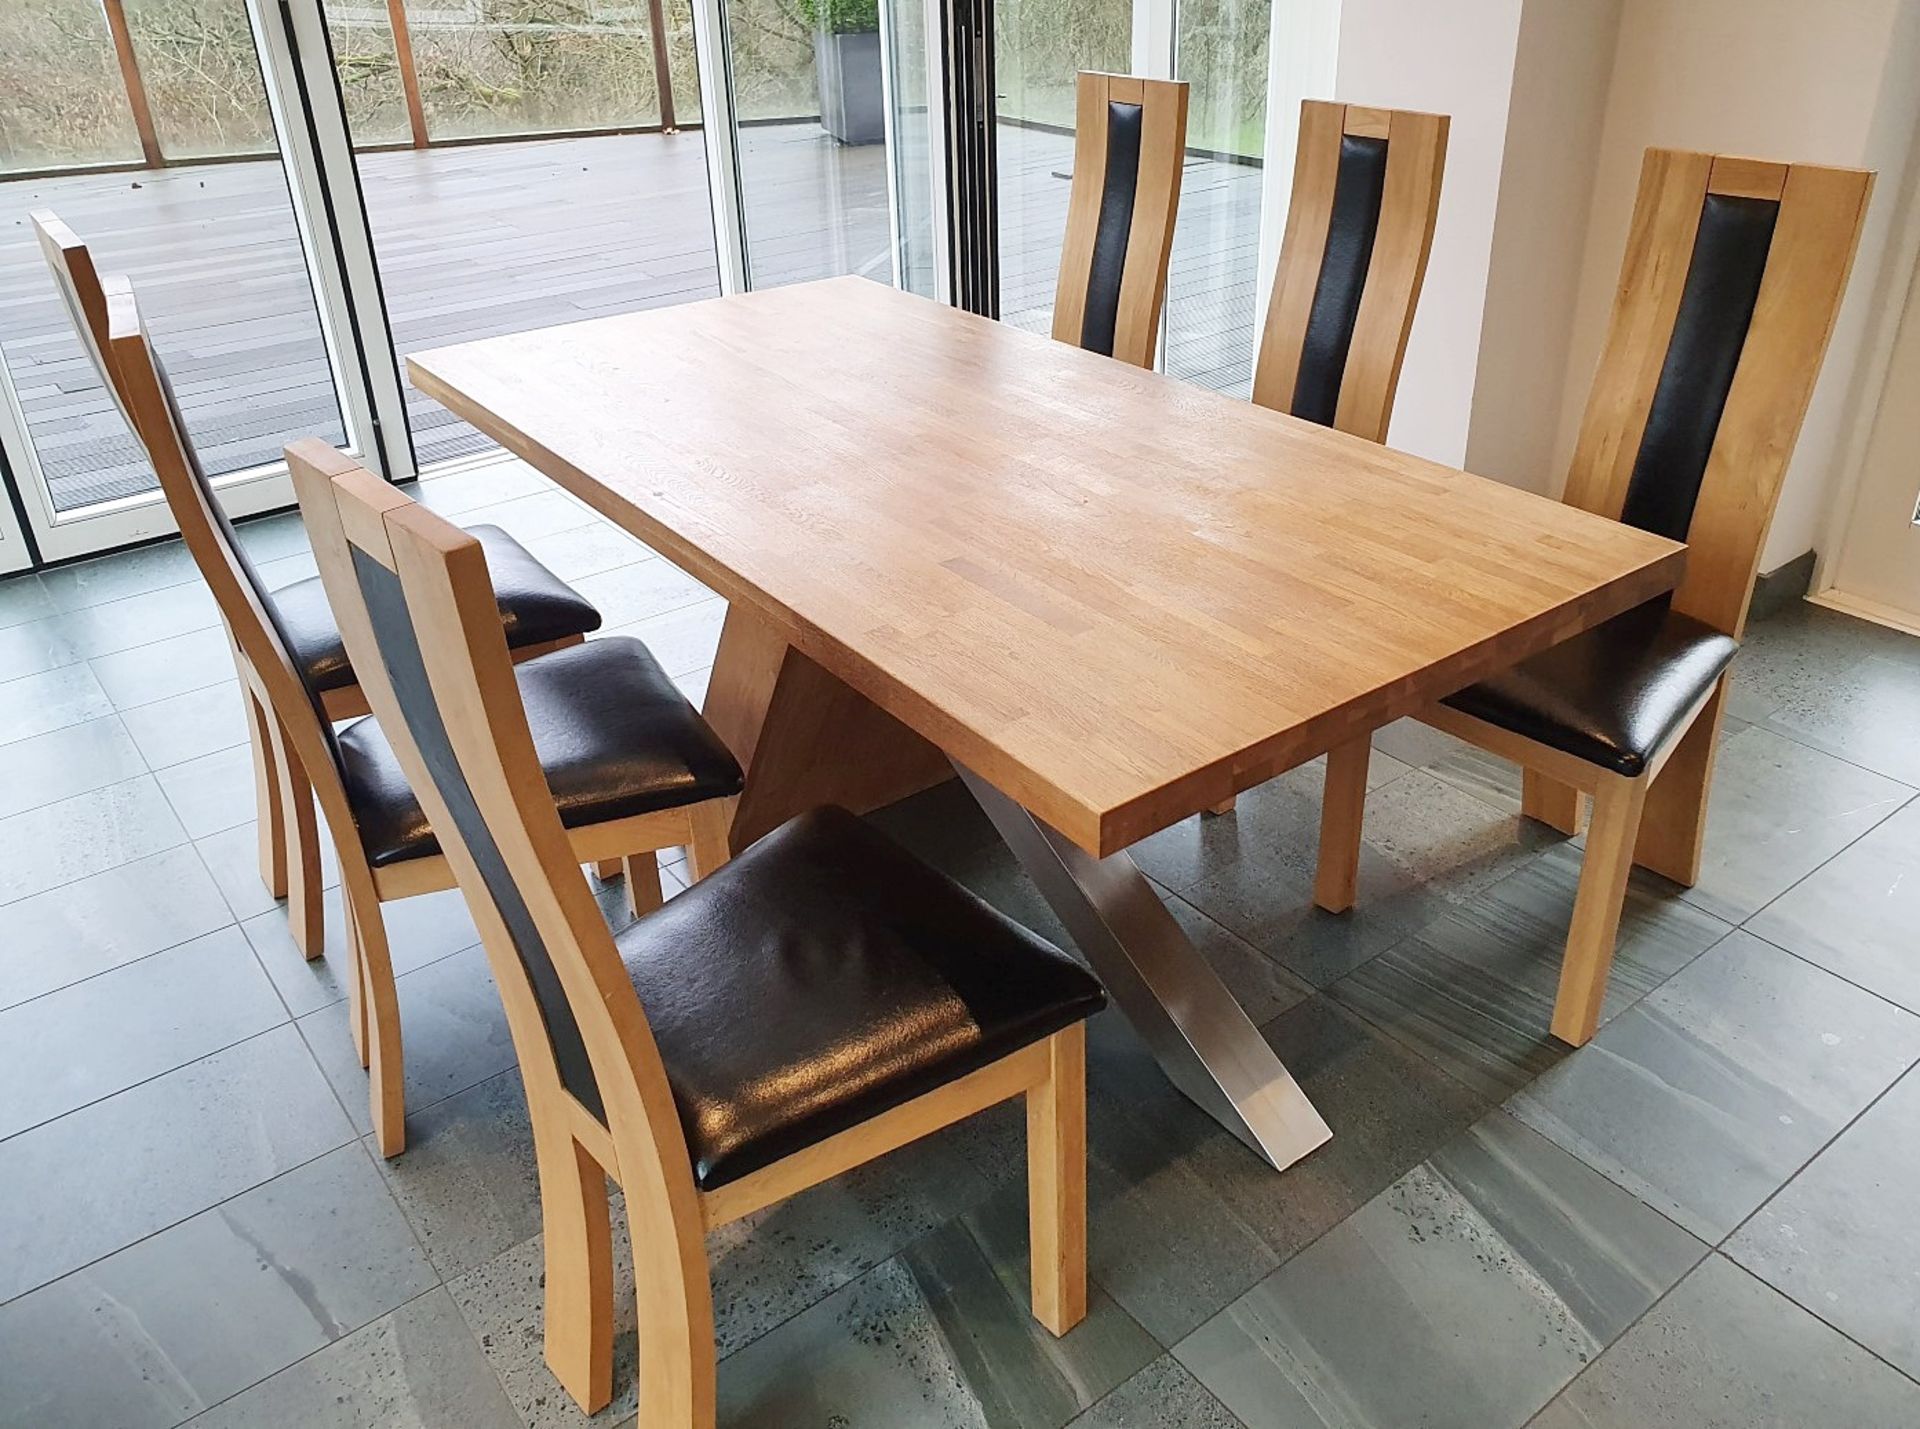 1 x Solid Oak 1.8 Metre Dining Table With 6 x High Back Dining Chairs - Pre-owned In Great Condition - Image 5 of 12